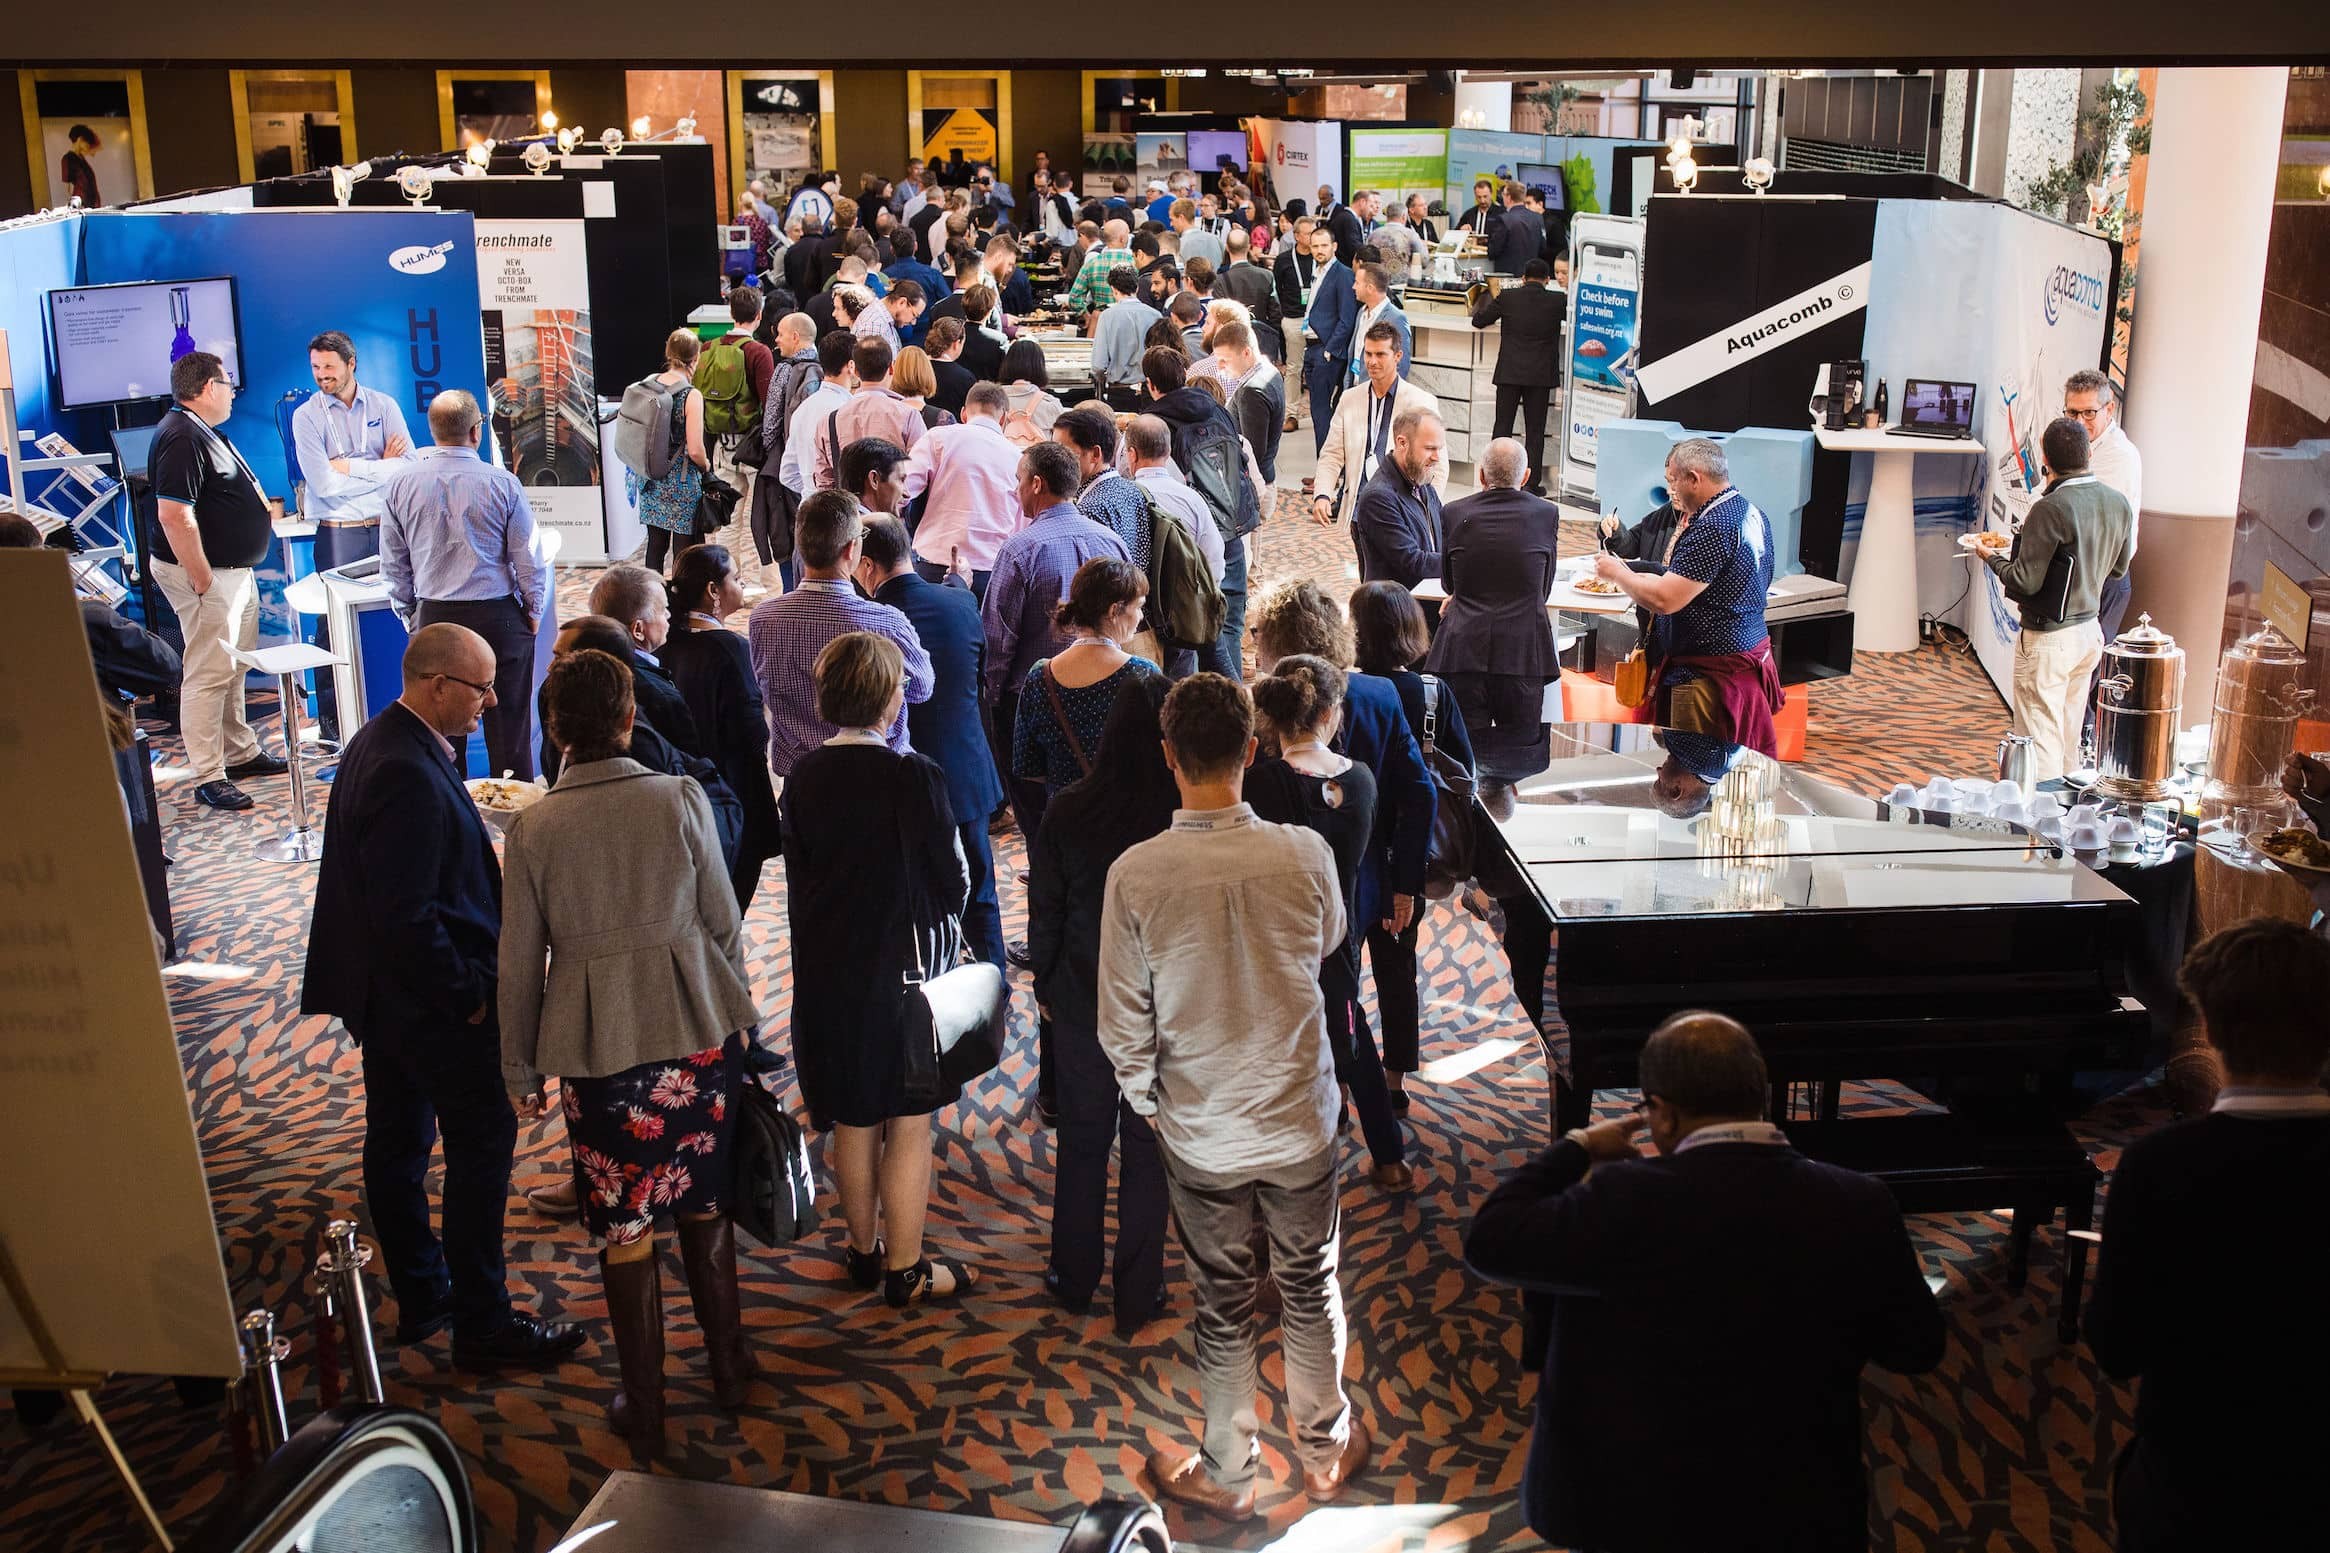 stormwater conference 2019, grand millennium hotel, auckland, conference